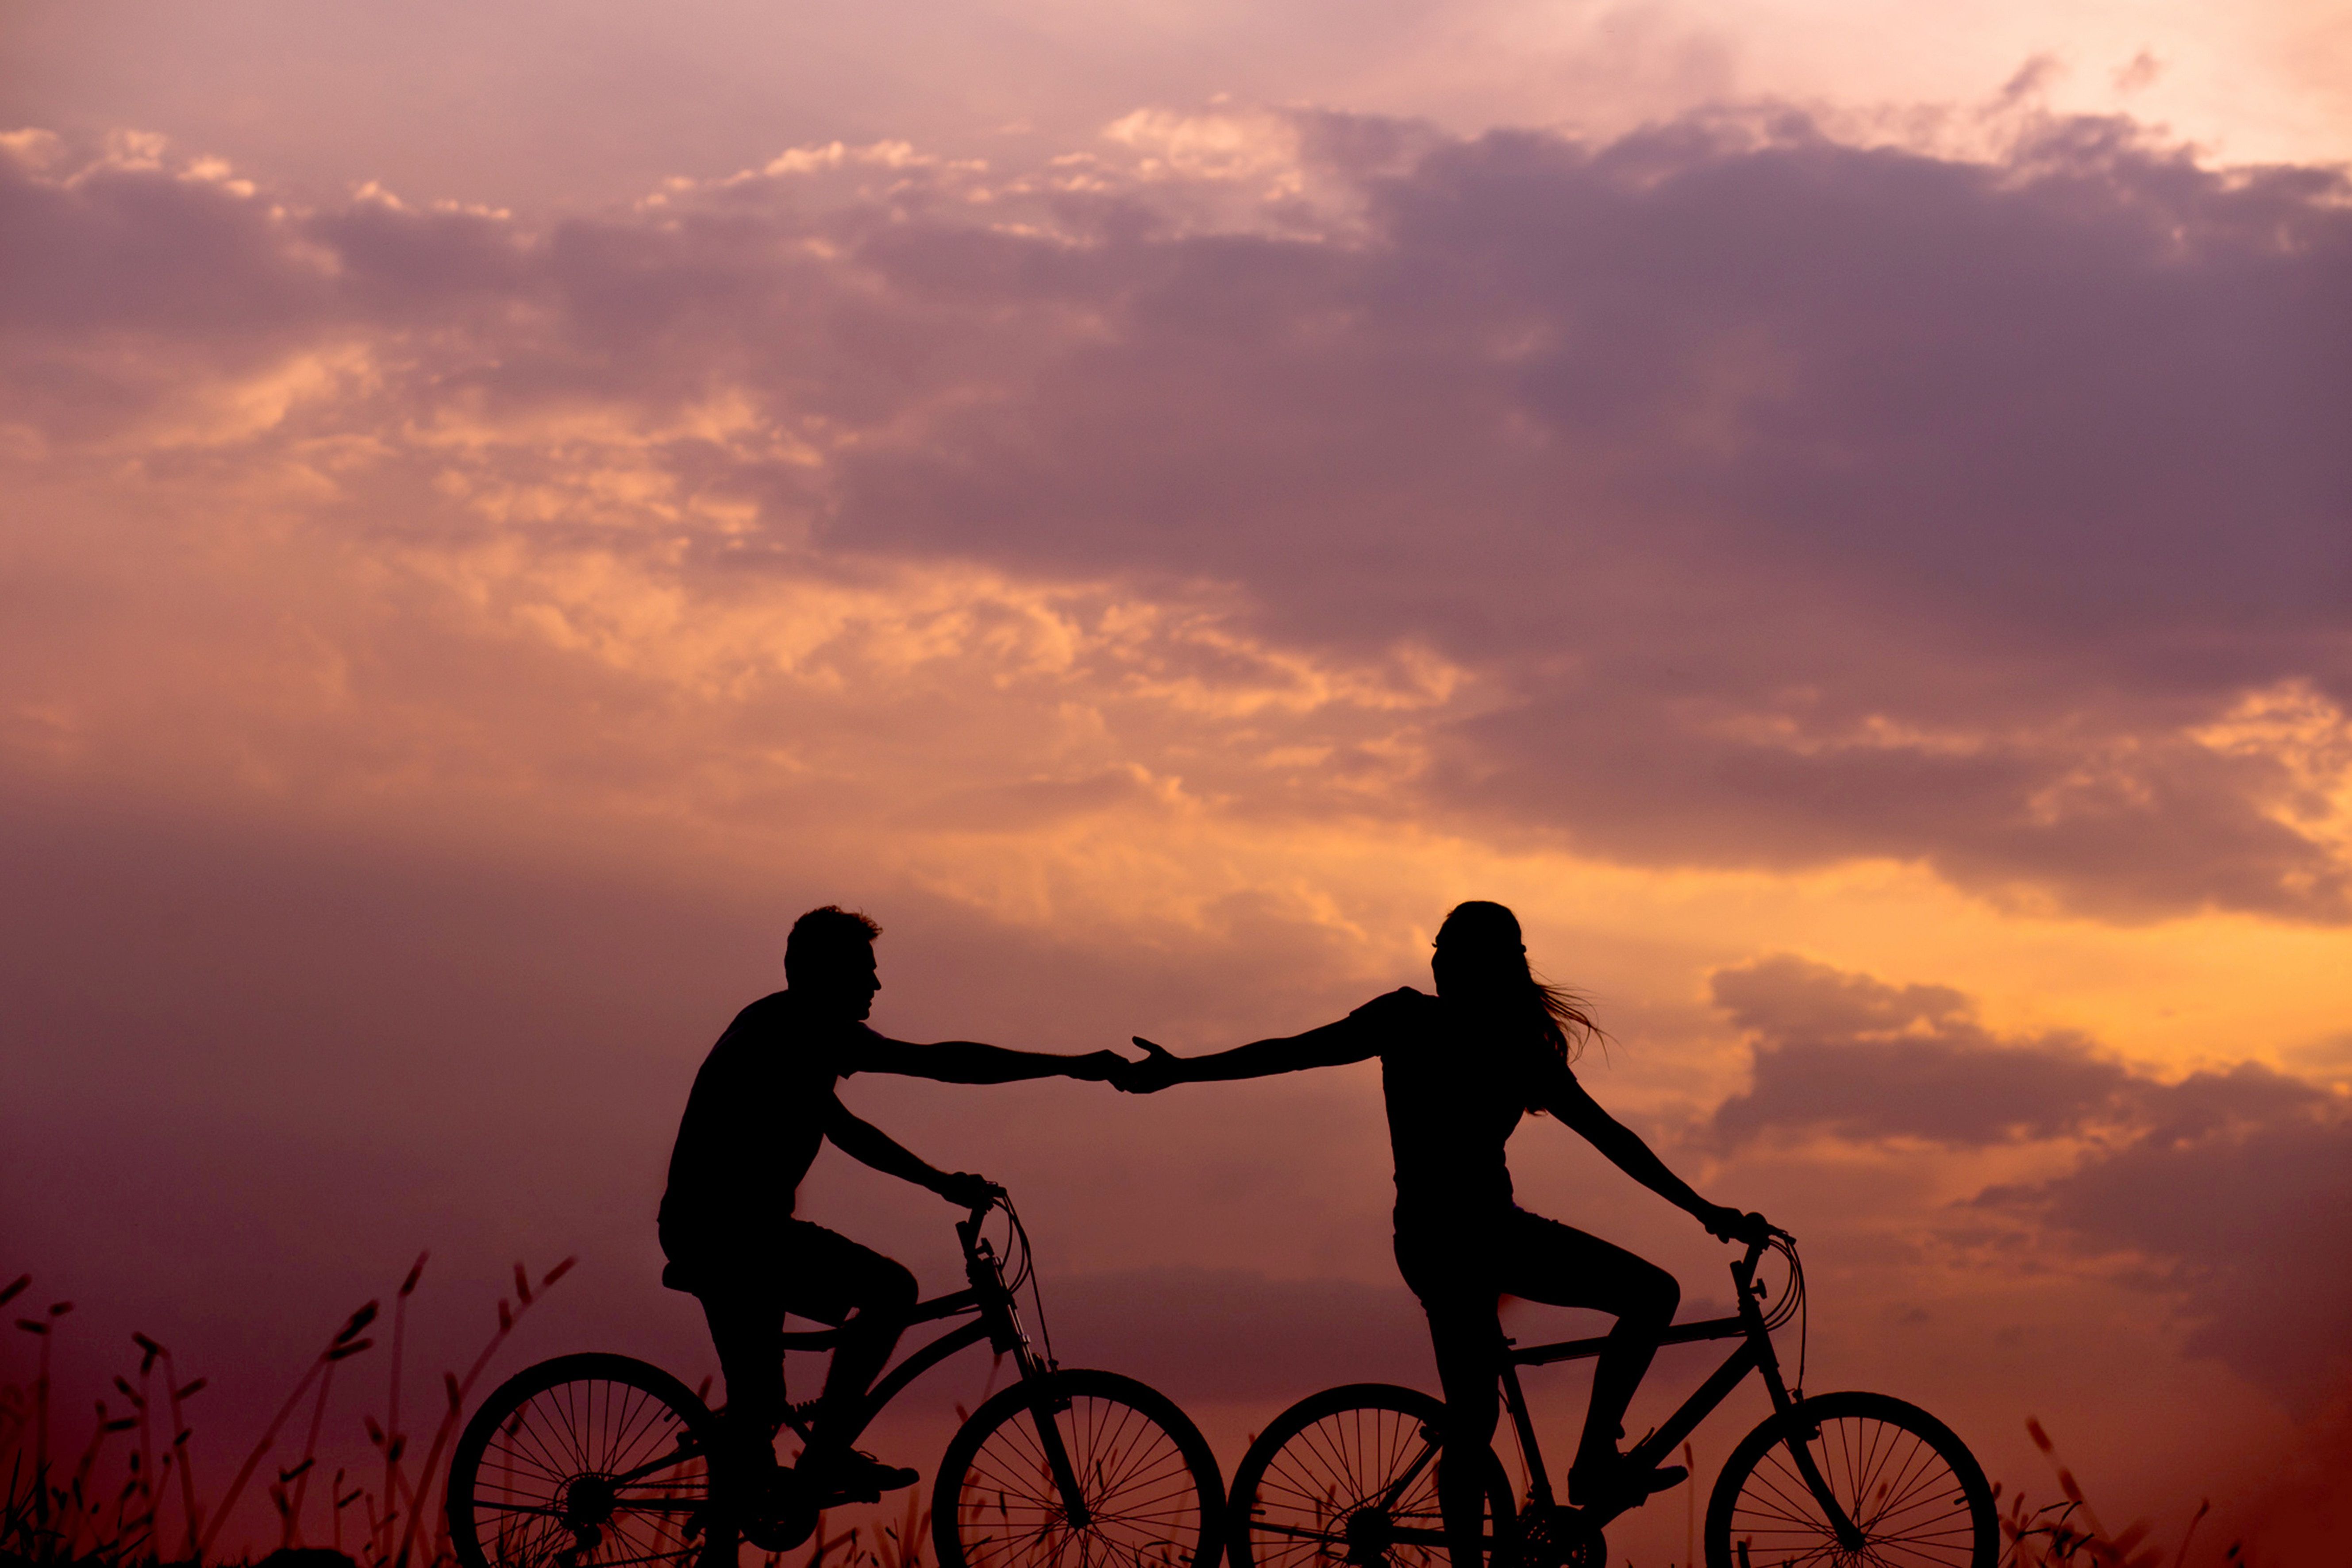 5315x3543 #orange, #people wallpaper, #touch, #romance, #pedal, # bicycle, #spoke, #love, #frame, #bike, #Free picture, #people background, #wallpaper, #couple, #hold, #man, #hand, #silhouette, #riding, #woman, #cycle. Mocah.org HD Desktop